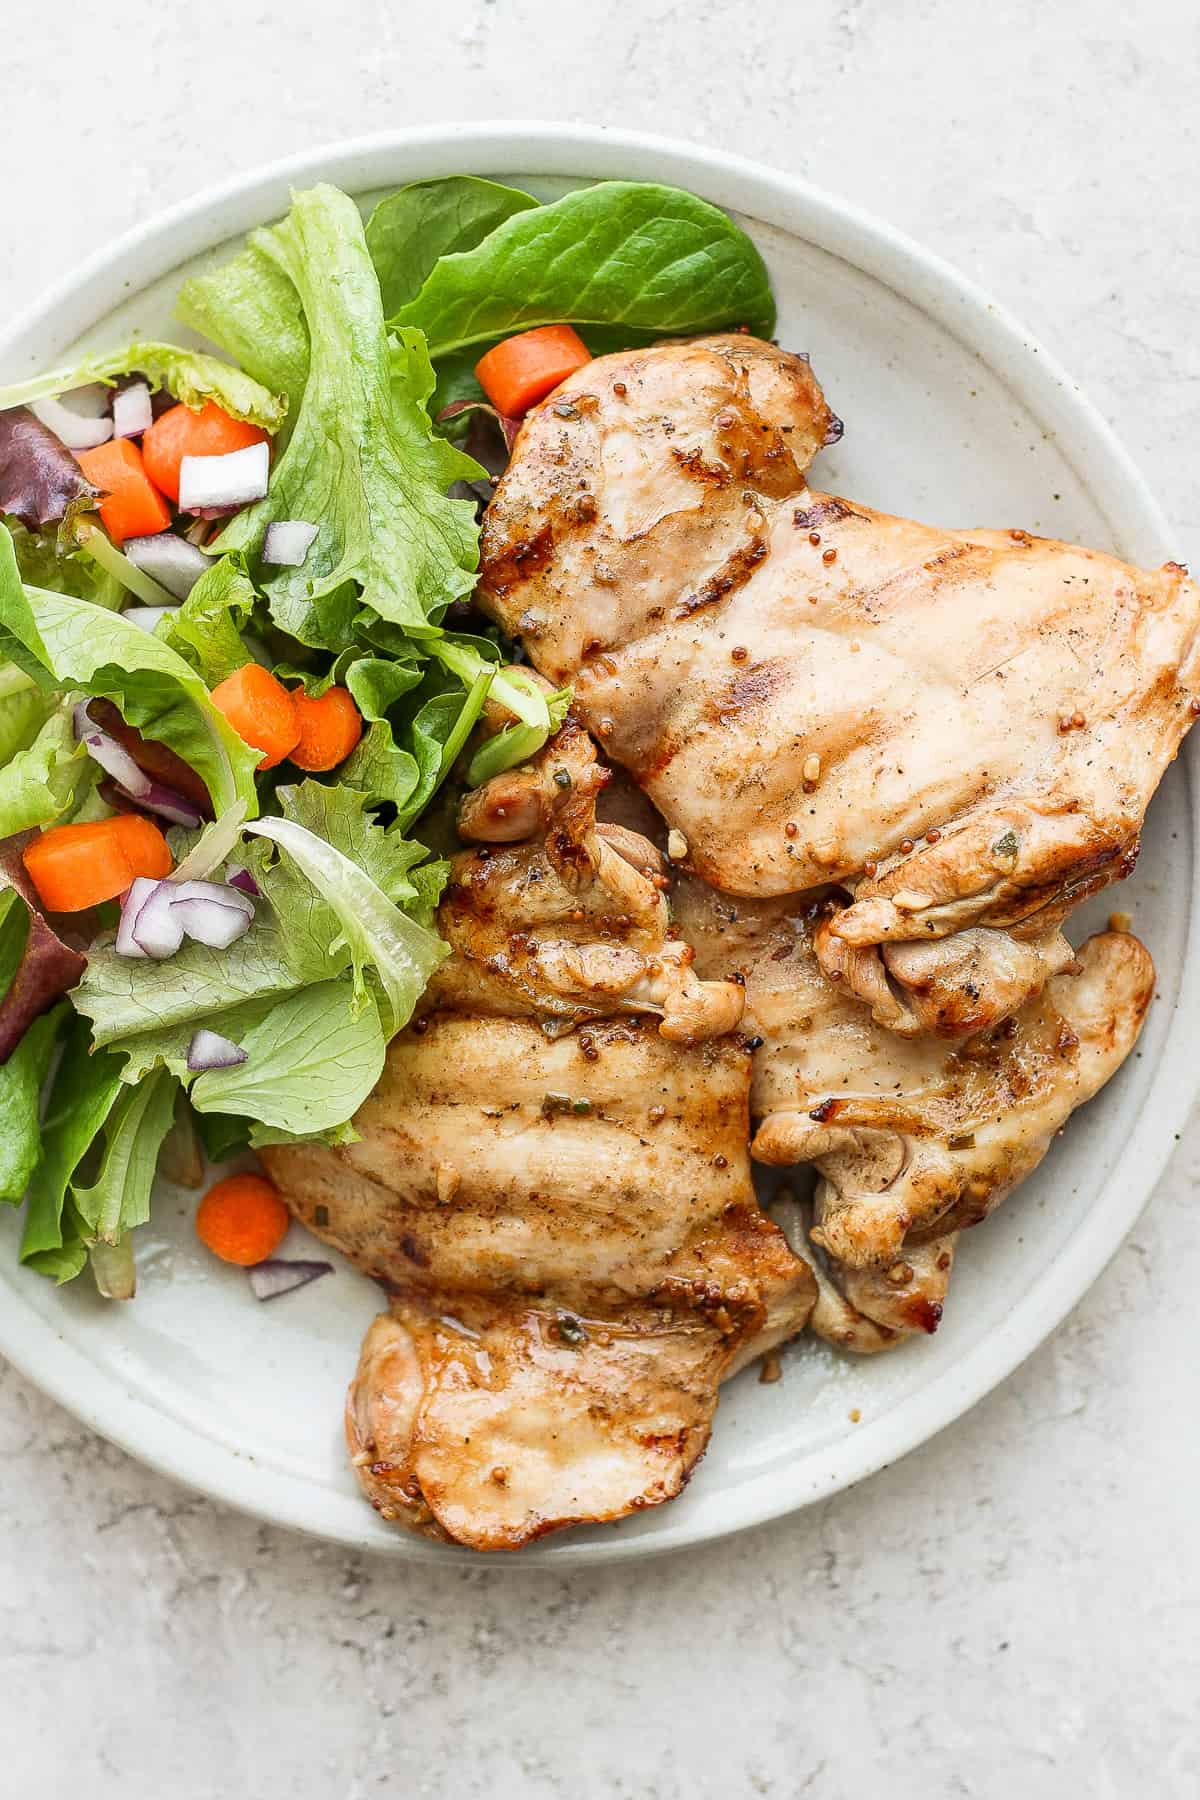 grilled chicken thighs on plate with greens.